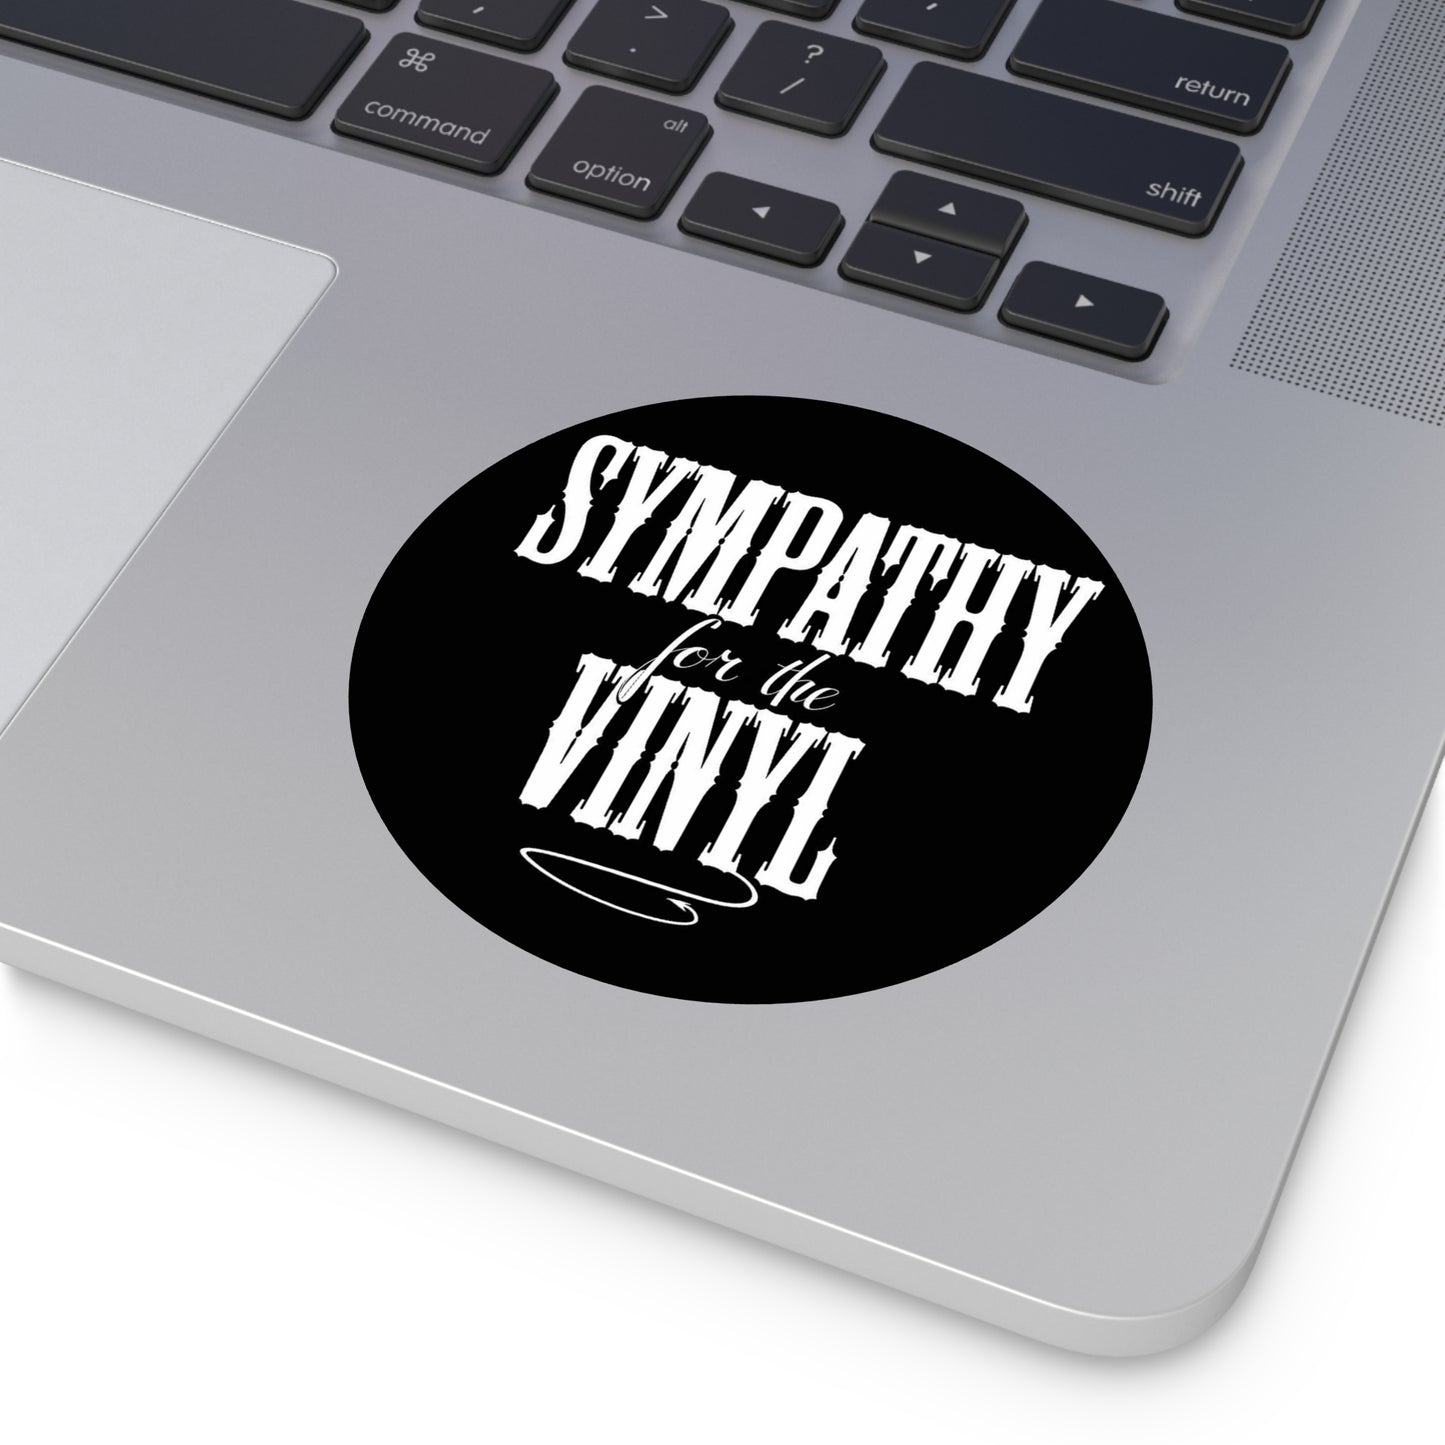 Vinyl Record Themed Round Vinyl Stickers - Sympathy for the Vinyl - 5 sizes available